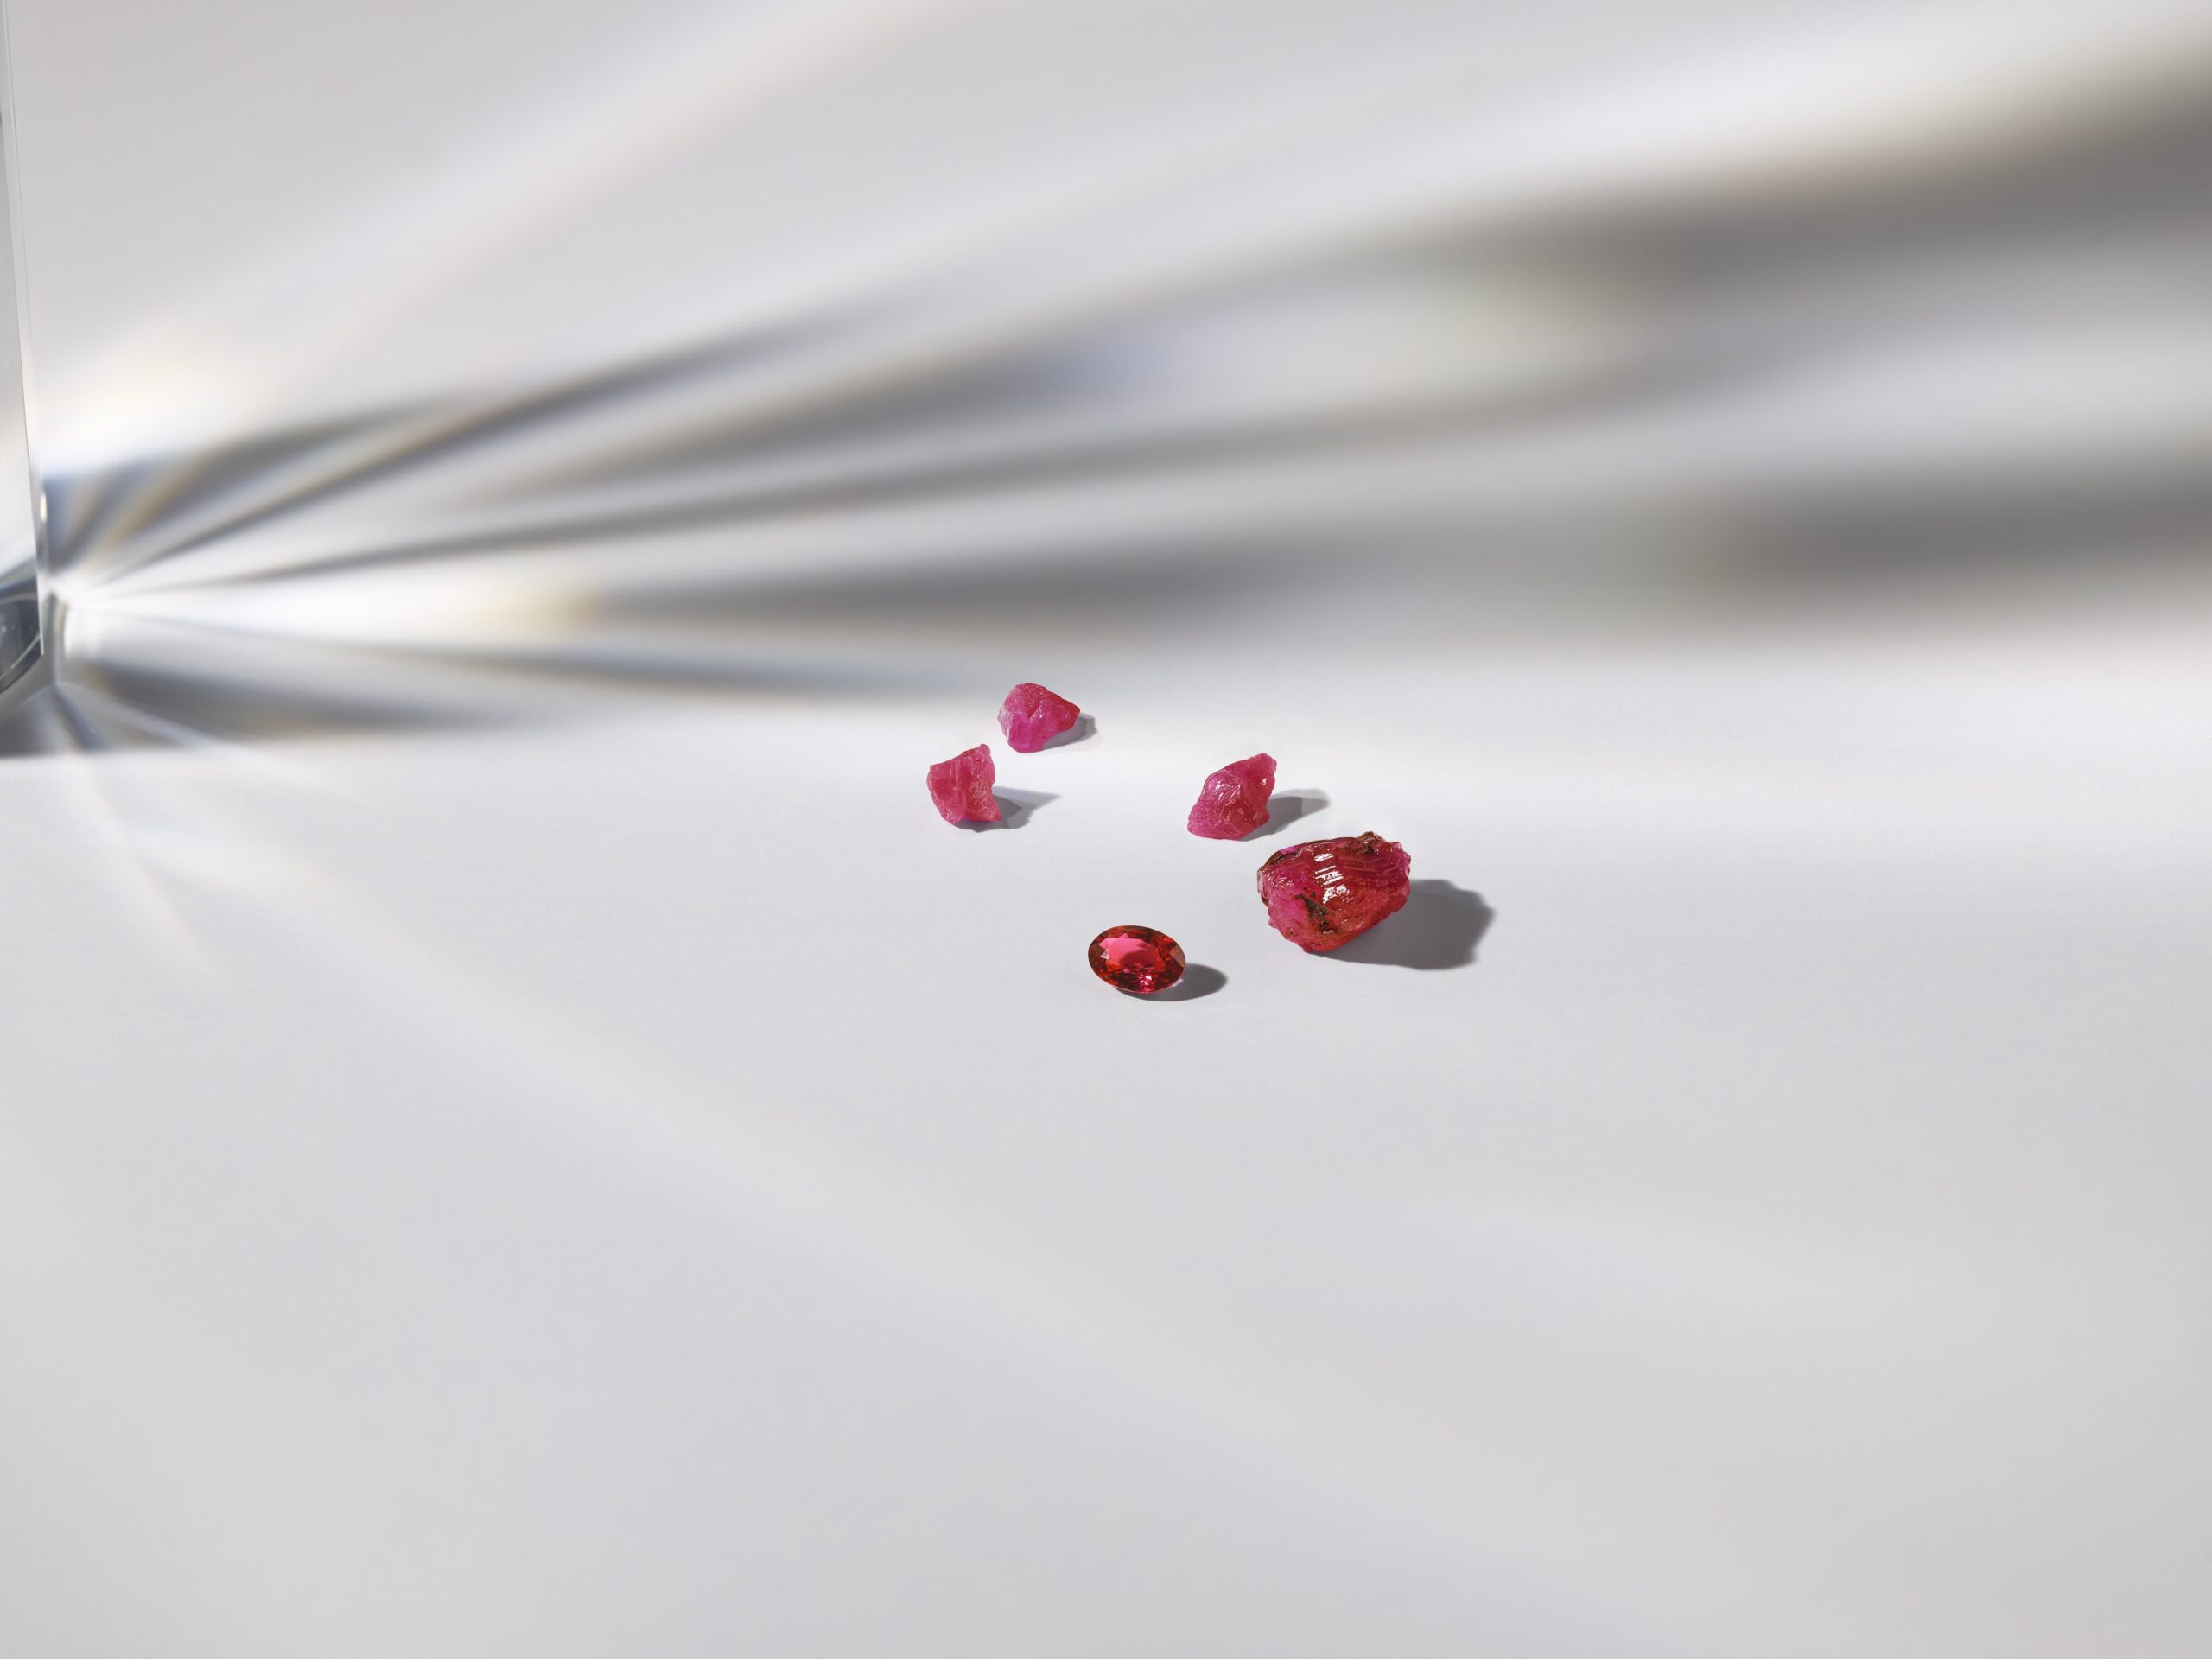 image of rough ruby gemstones and an oval cut ruby gemstone